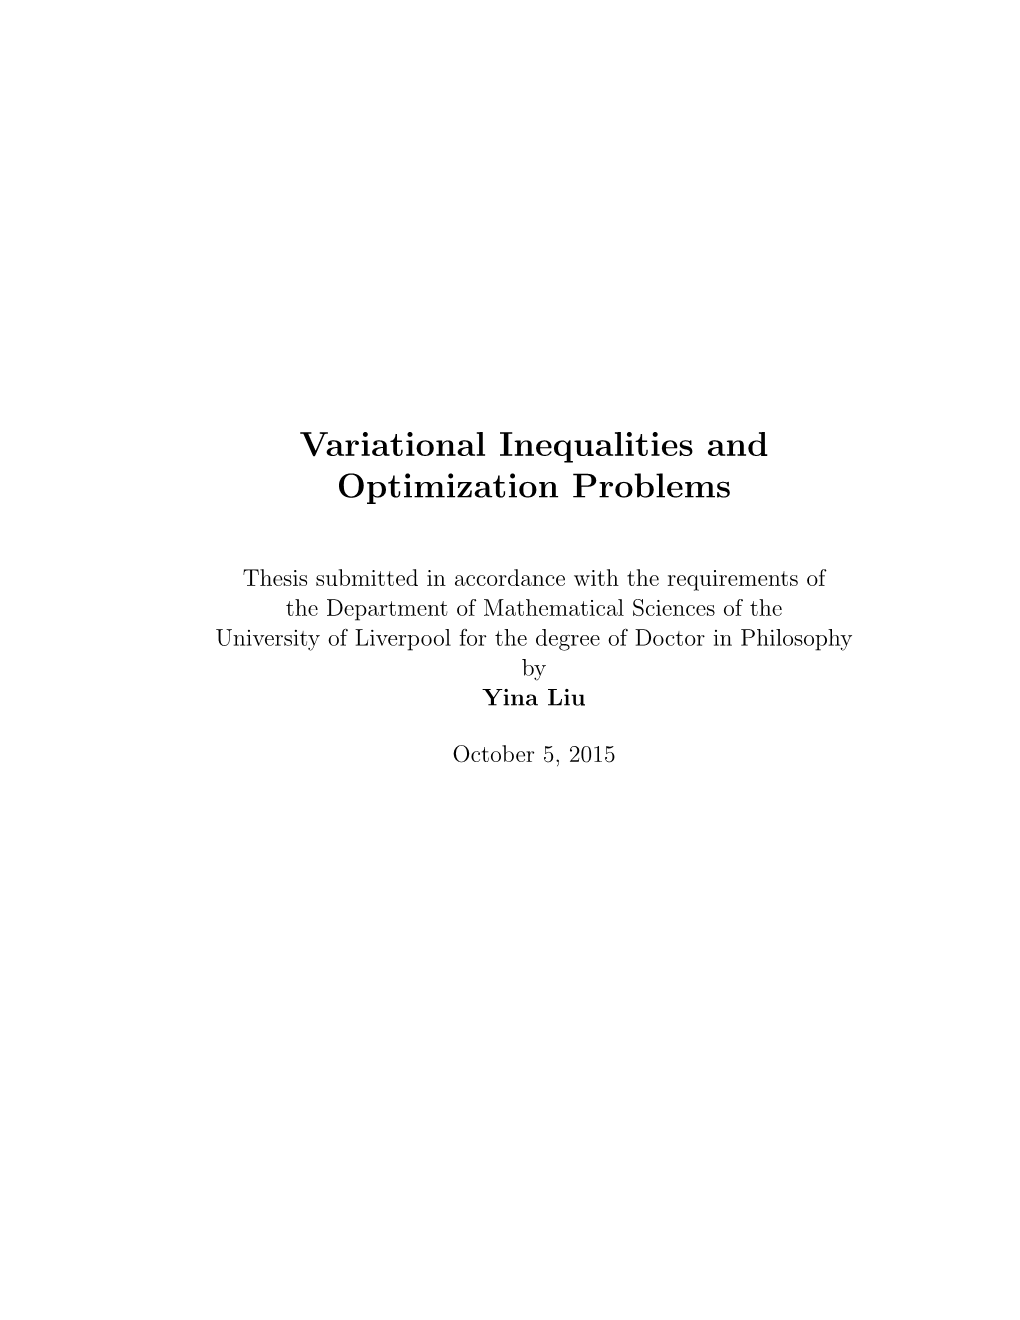 Variational Inequalities and Optimization Problems